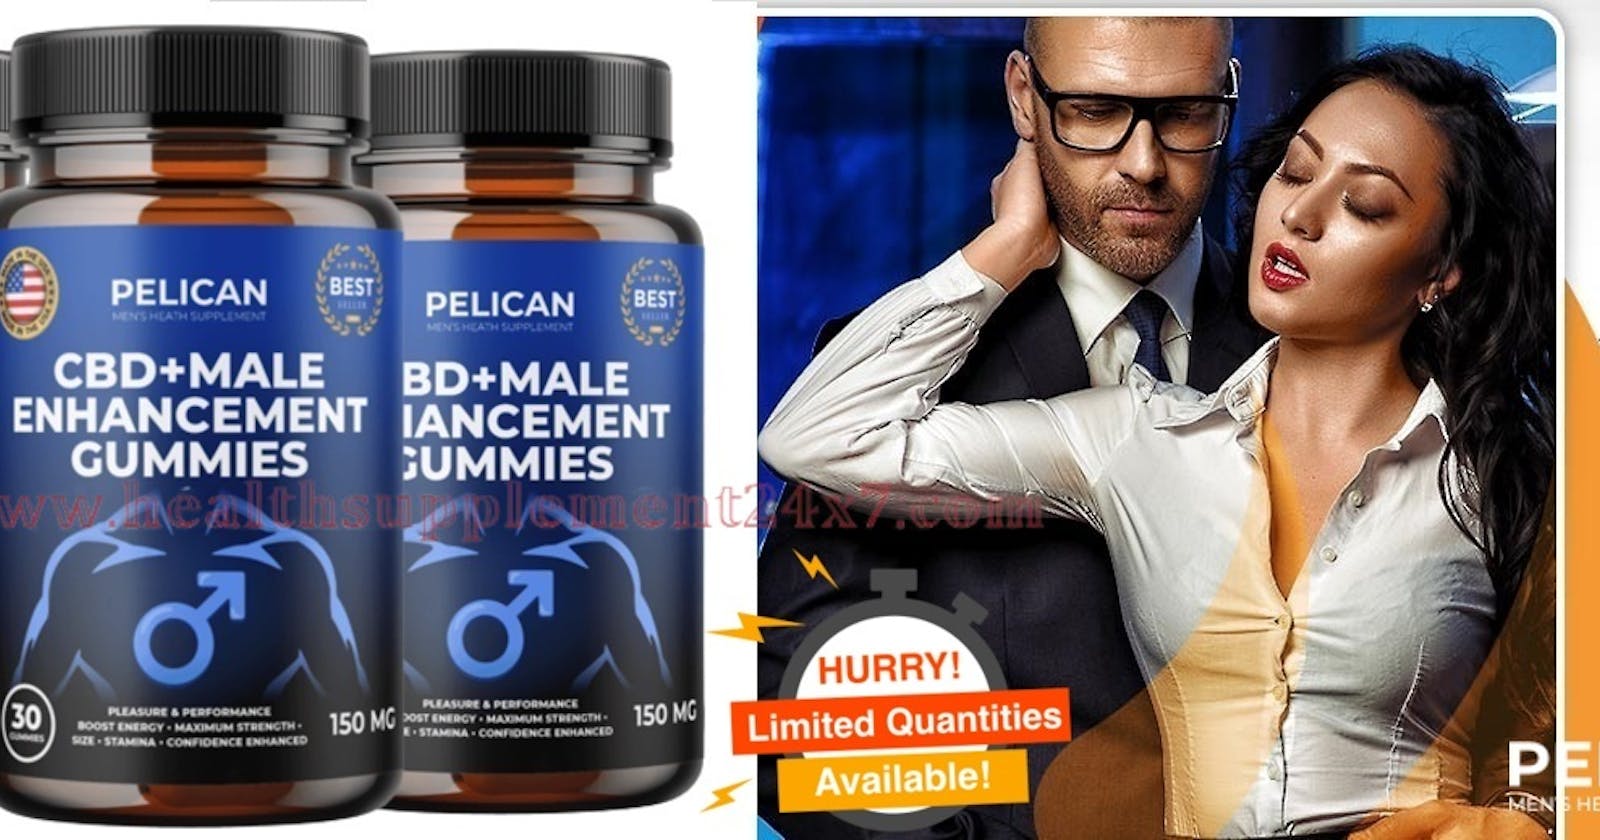 Pelican CBD Male Enhancement Gummies Increase And Boost Sex Drive & Arousal With a Bigger Appetite(REAL OR HOAX)